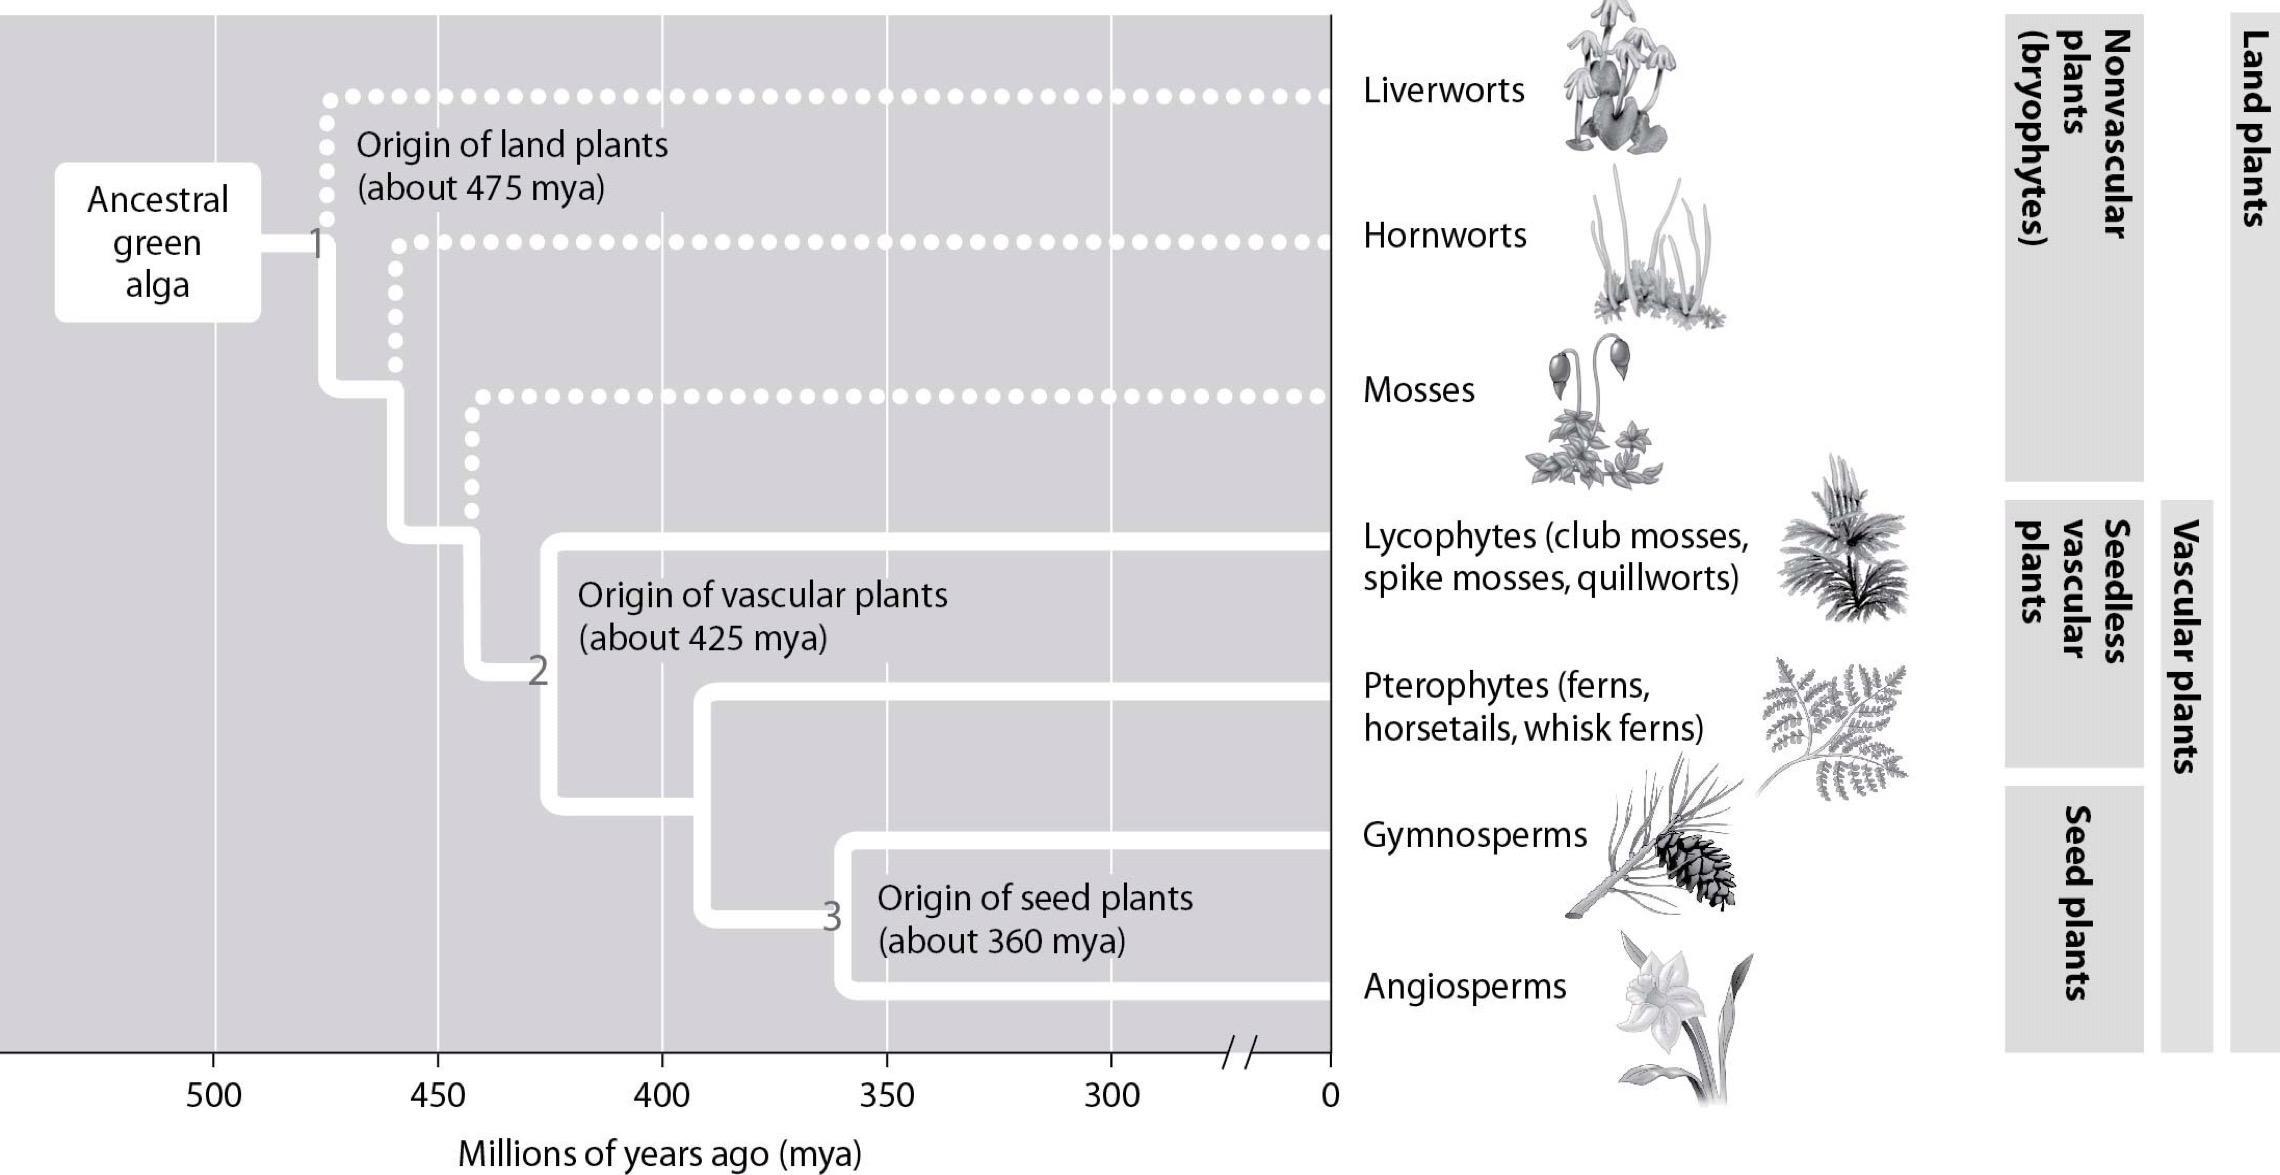 According To This Figure, At What Time In The Evolutionary History Of Plants Did Vascular Systems Likely